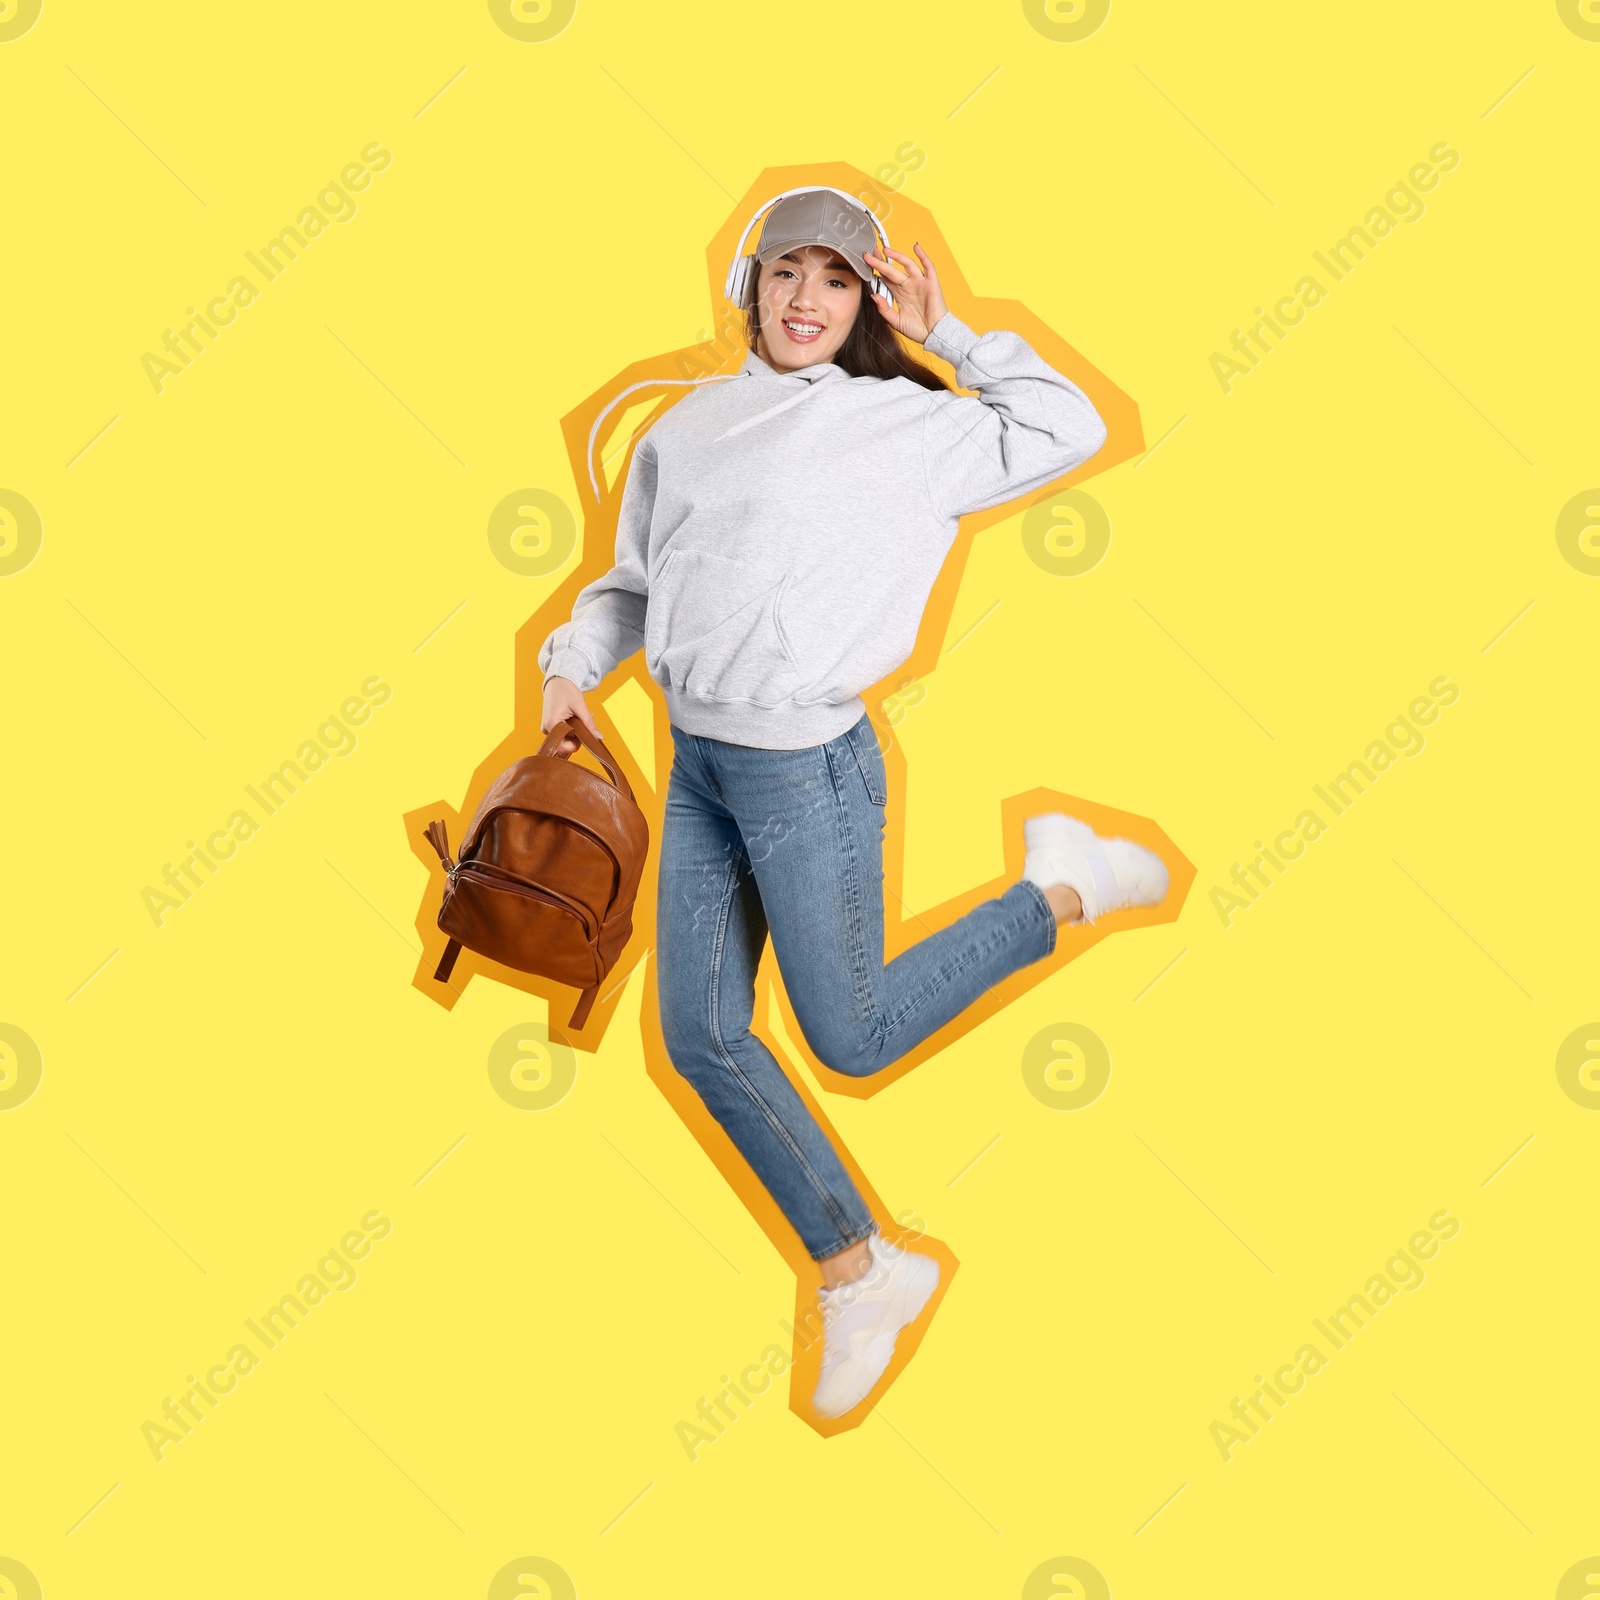 Image of Pop art poster. Beautiful young woman with stylish leather backpack and headphones jumping on yellow background